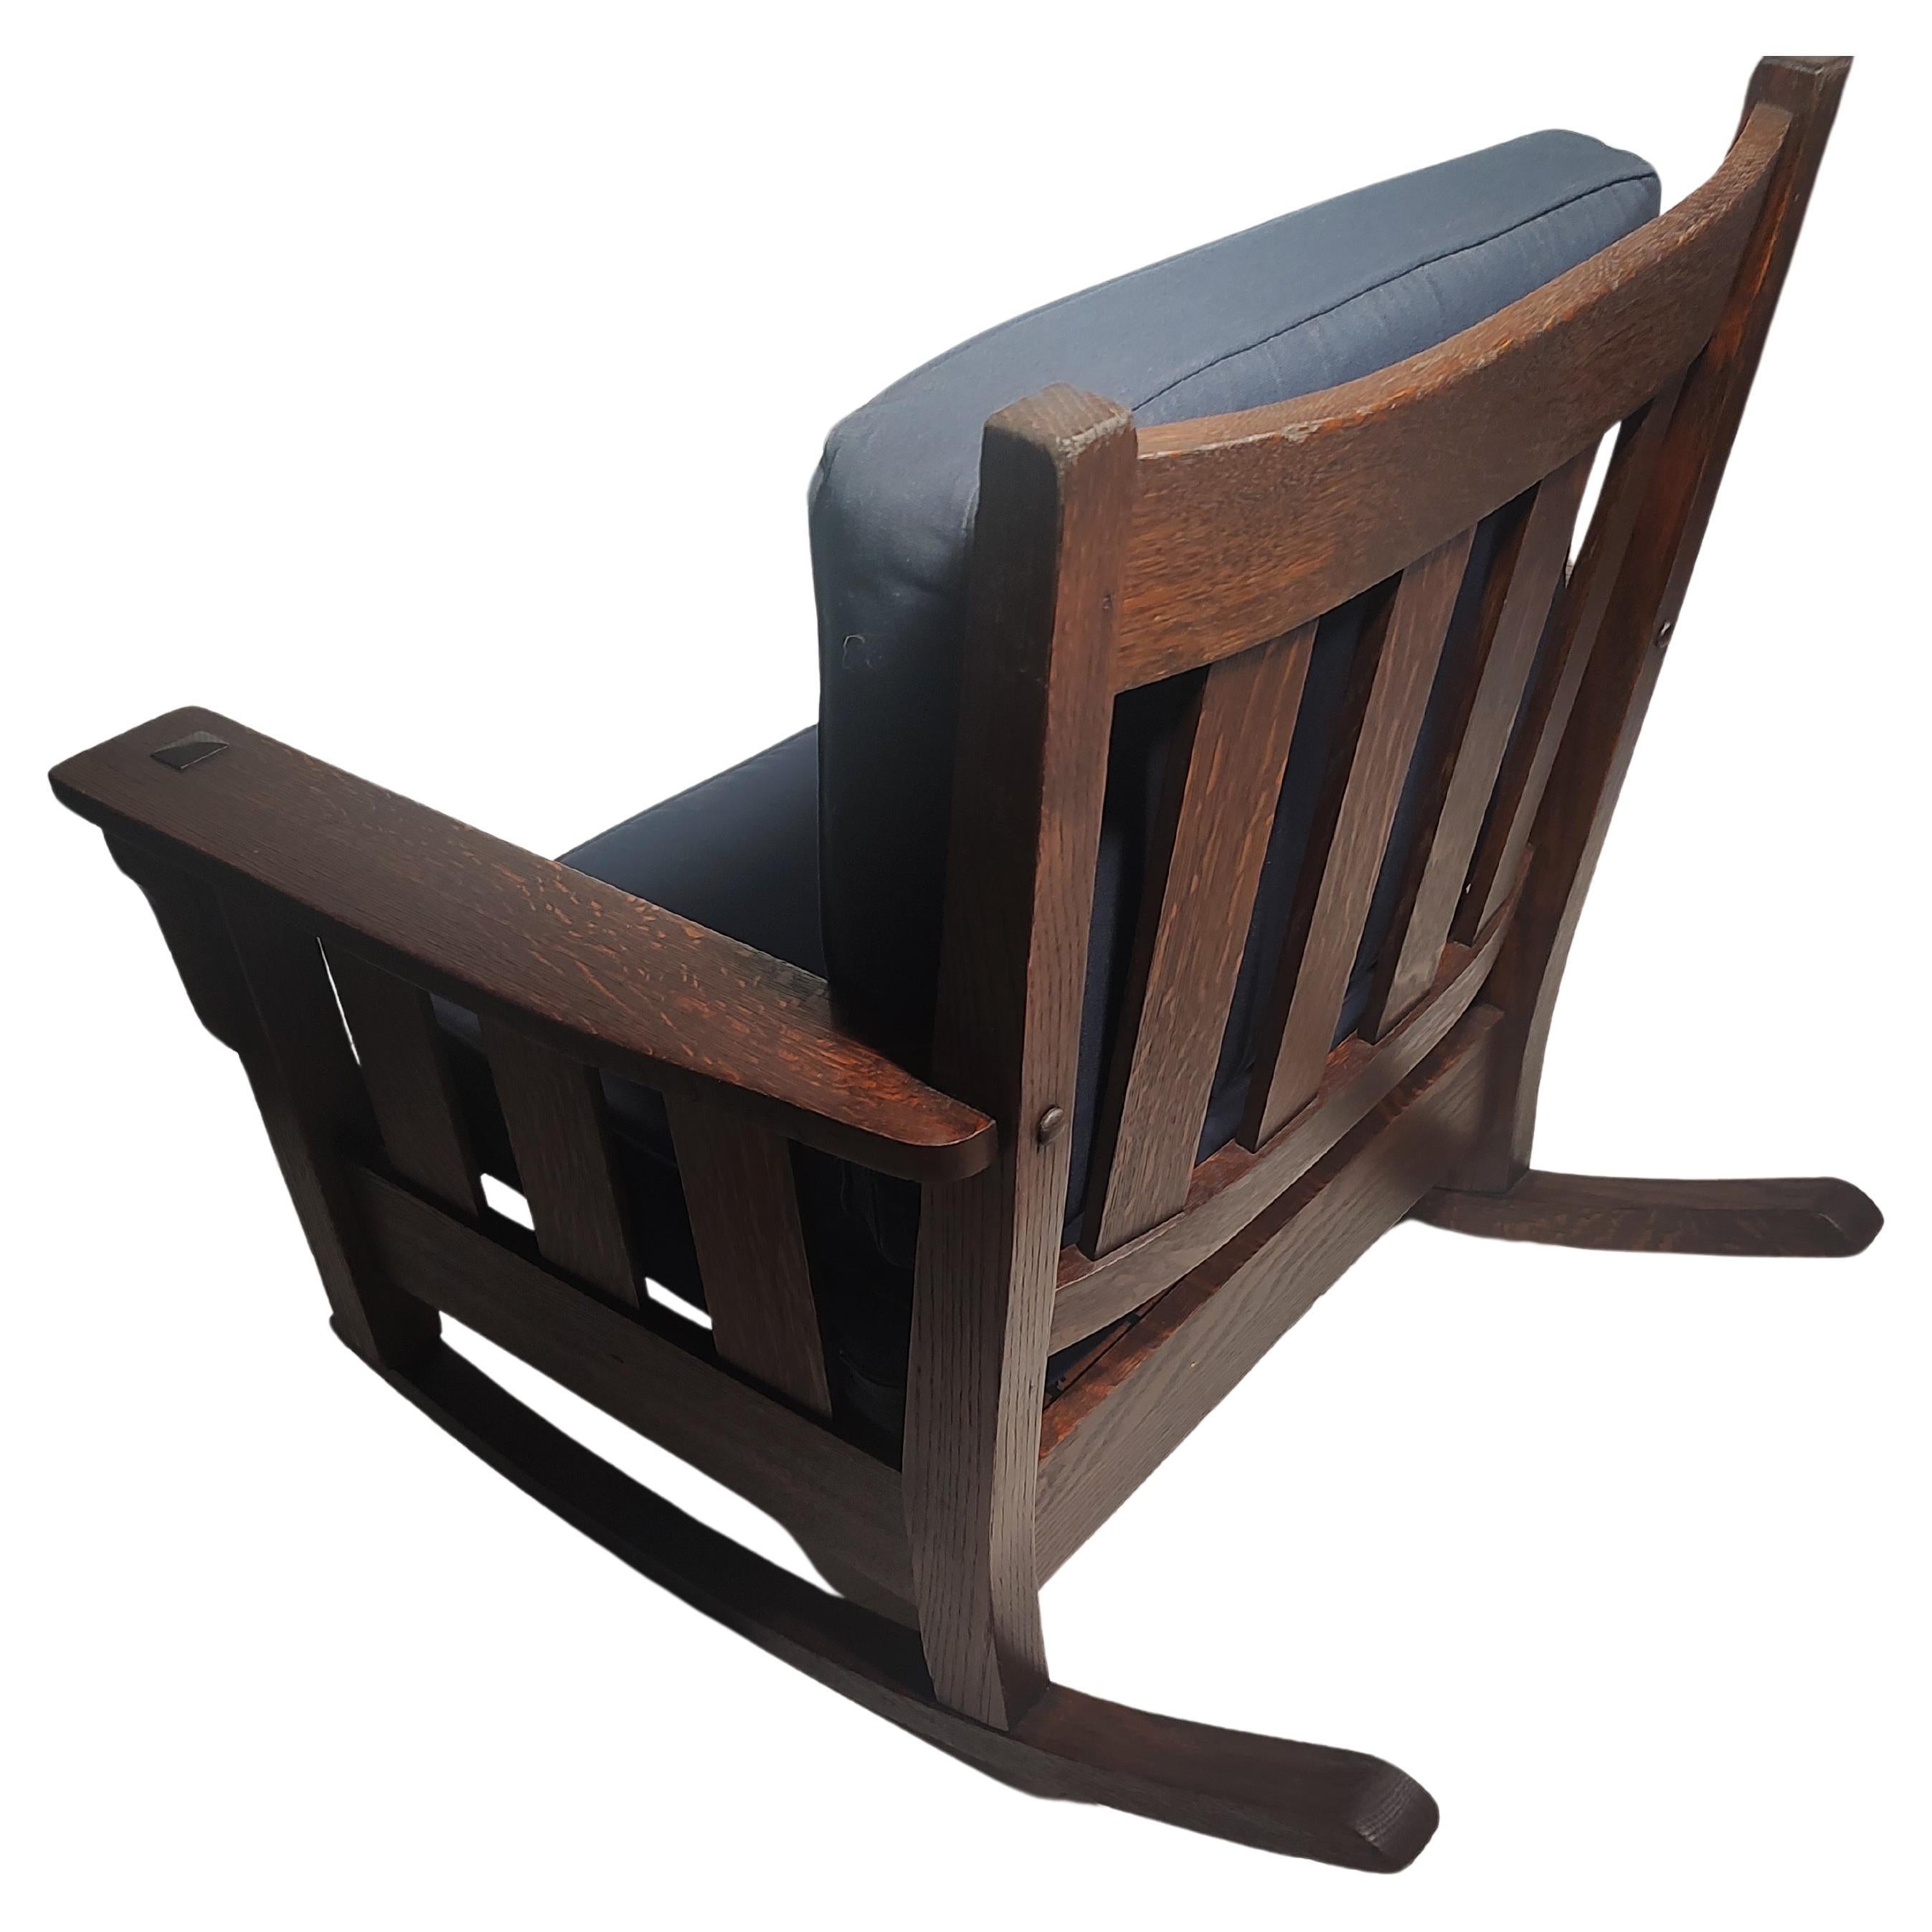 Fabulous heavy duty slatted rocking chair in excellent antique condition attributed to the Stickley Brothers furniture Co. Deep rich color to the quarter sawn oak. All pegged with mortise & tenon construction. Newer cushions with a navy blue cotton